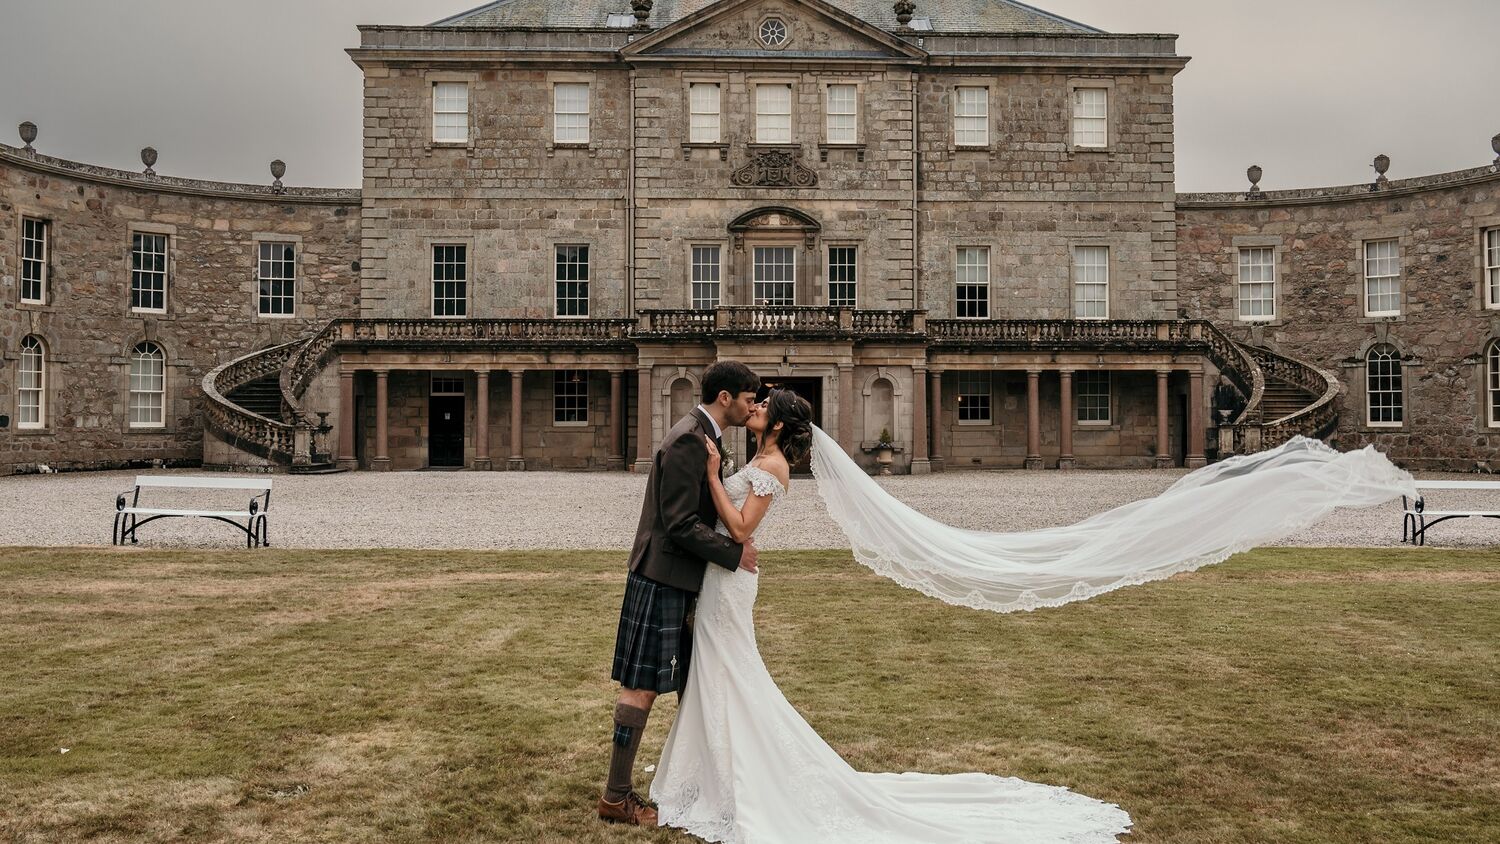 A bride and groom kiss on the lawn in front of Haddo House. The wind is blowing the bride's long veil right out behind her.